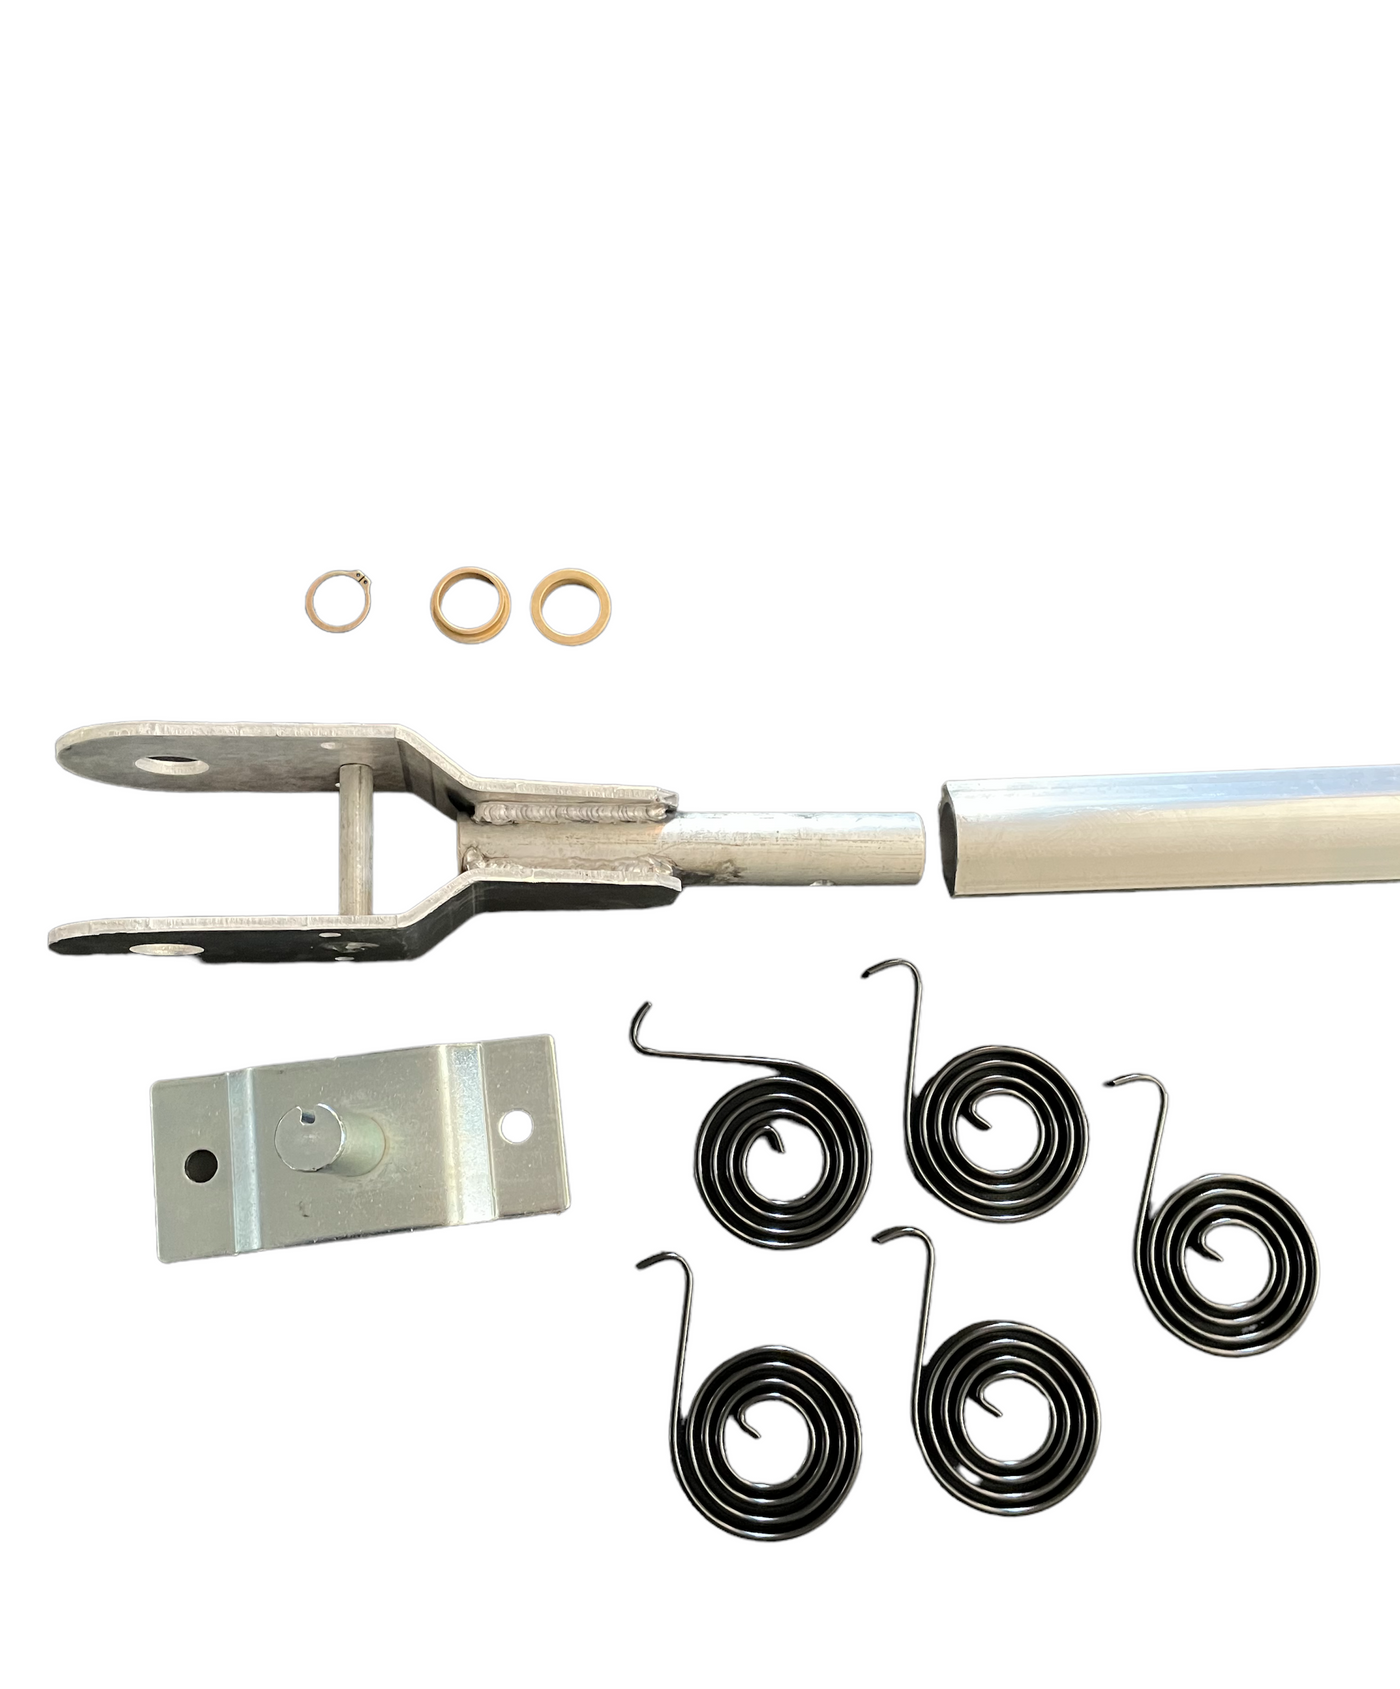 5 SPRING BULLETPROOF ARM ELECTRIC KIT TO GO